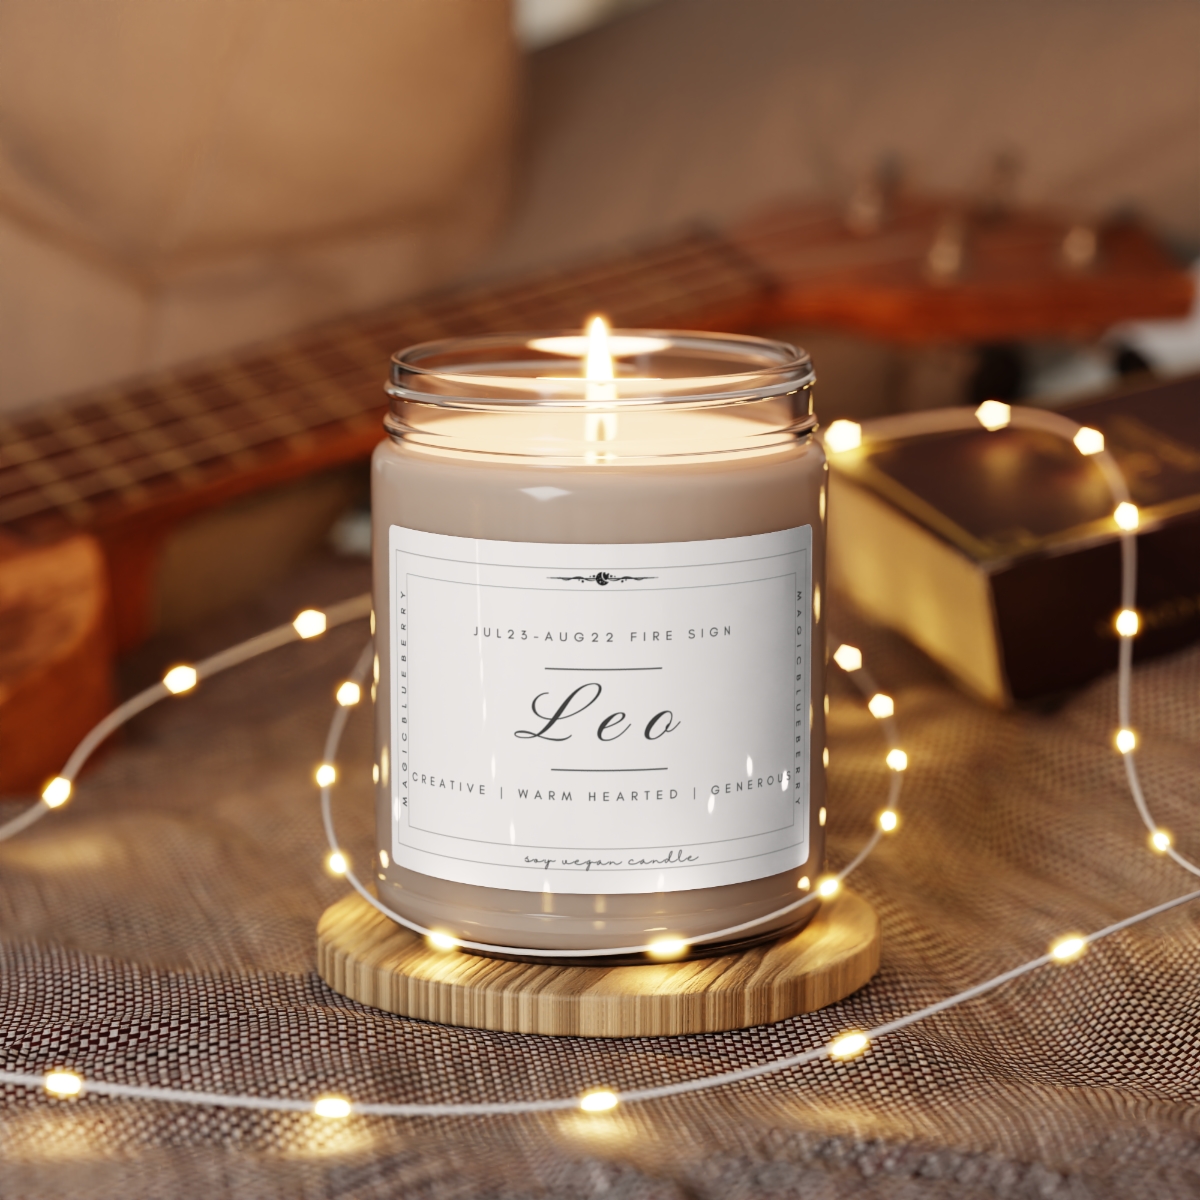 Leo - Scented Vegan Soy Wax Candle Clear Jar Candle, Spell Candle, Sassy Candle Vegan Candle Cotton Wick Candle Home Deco product main image